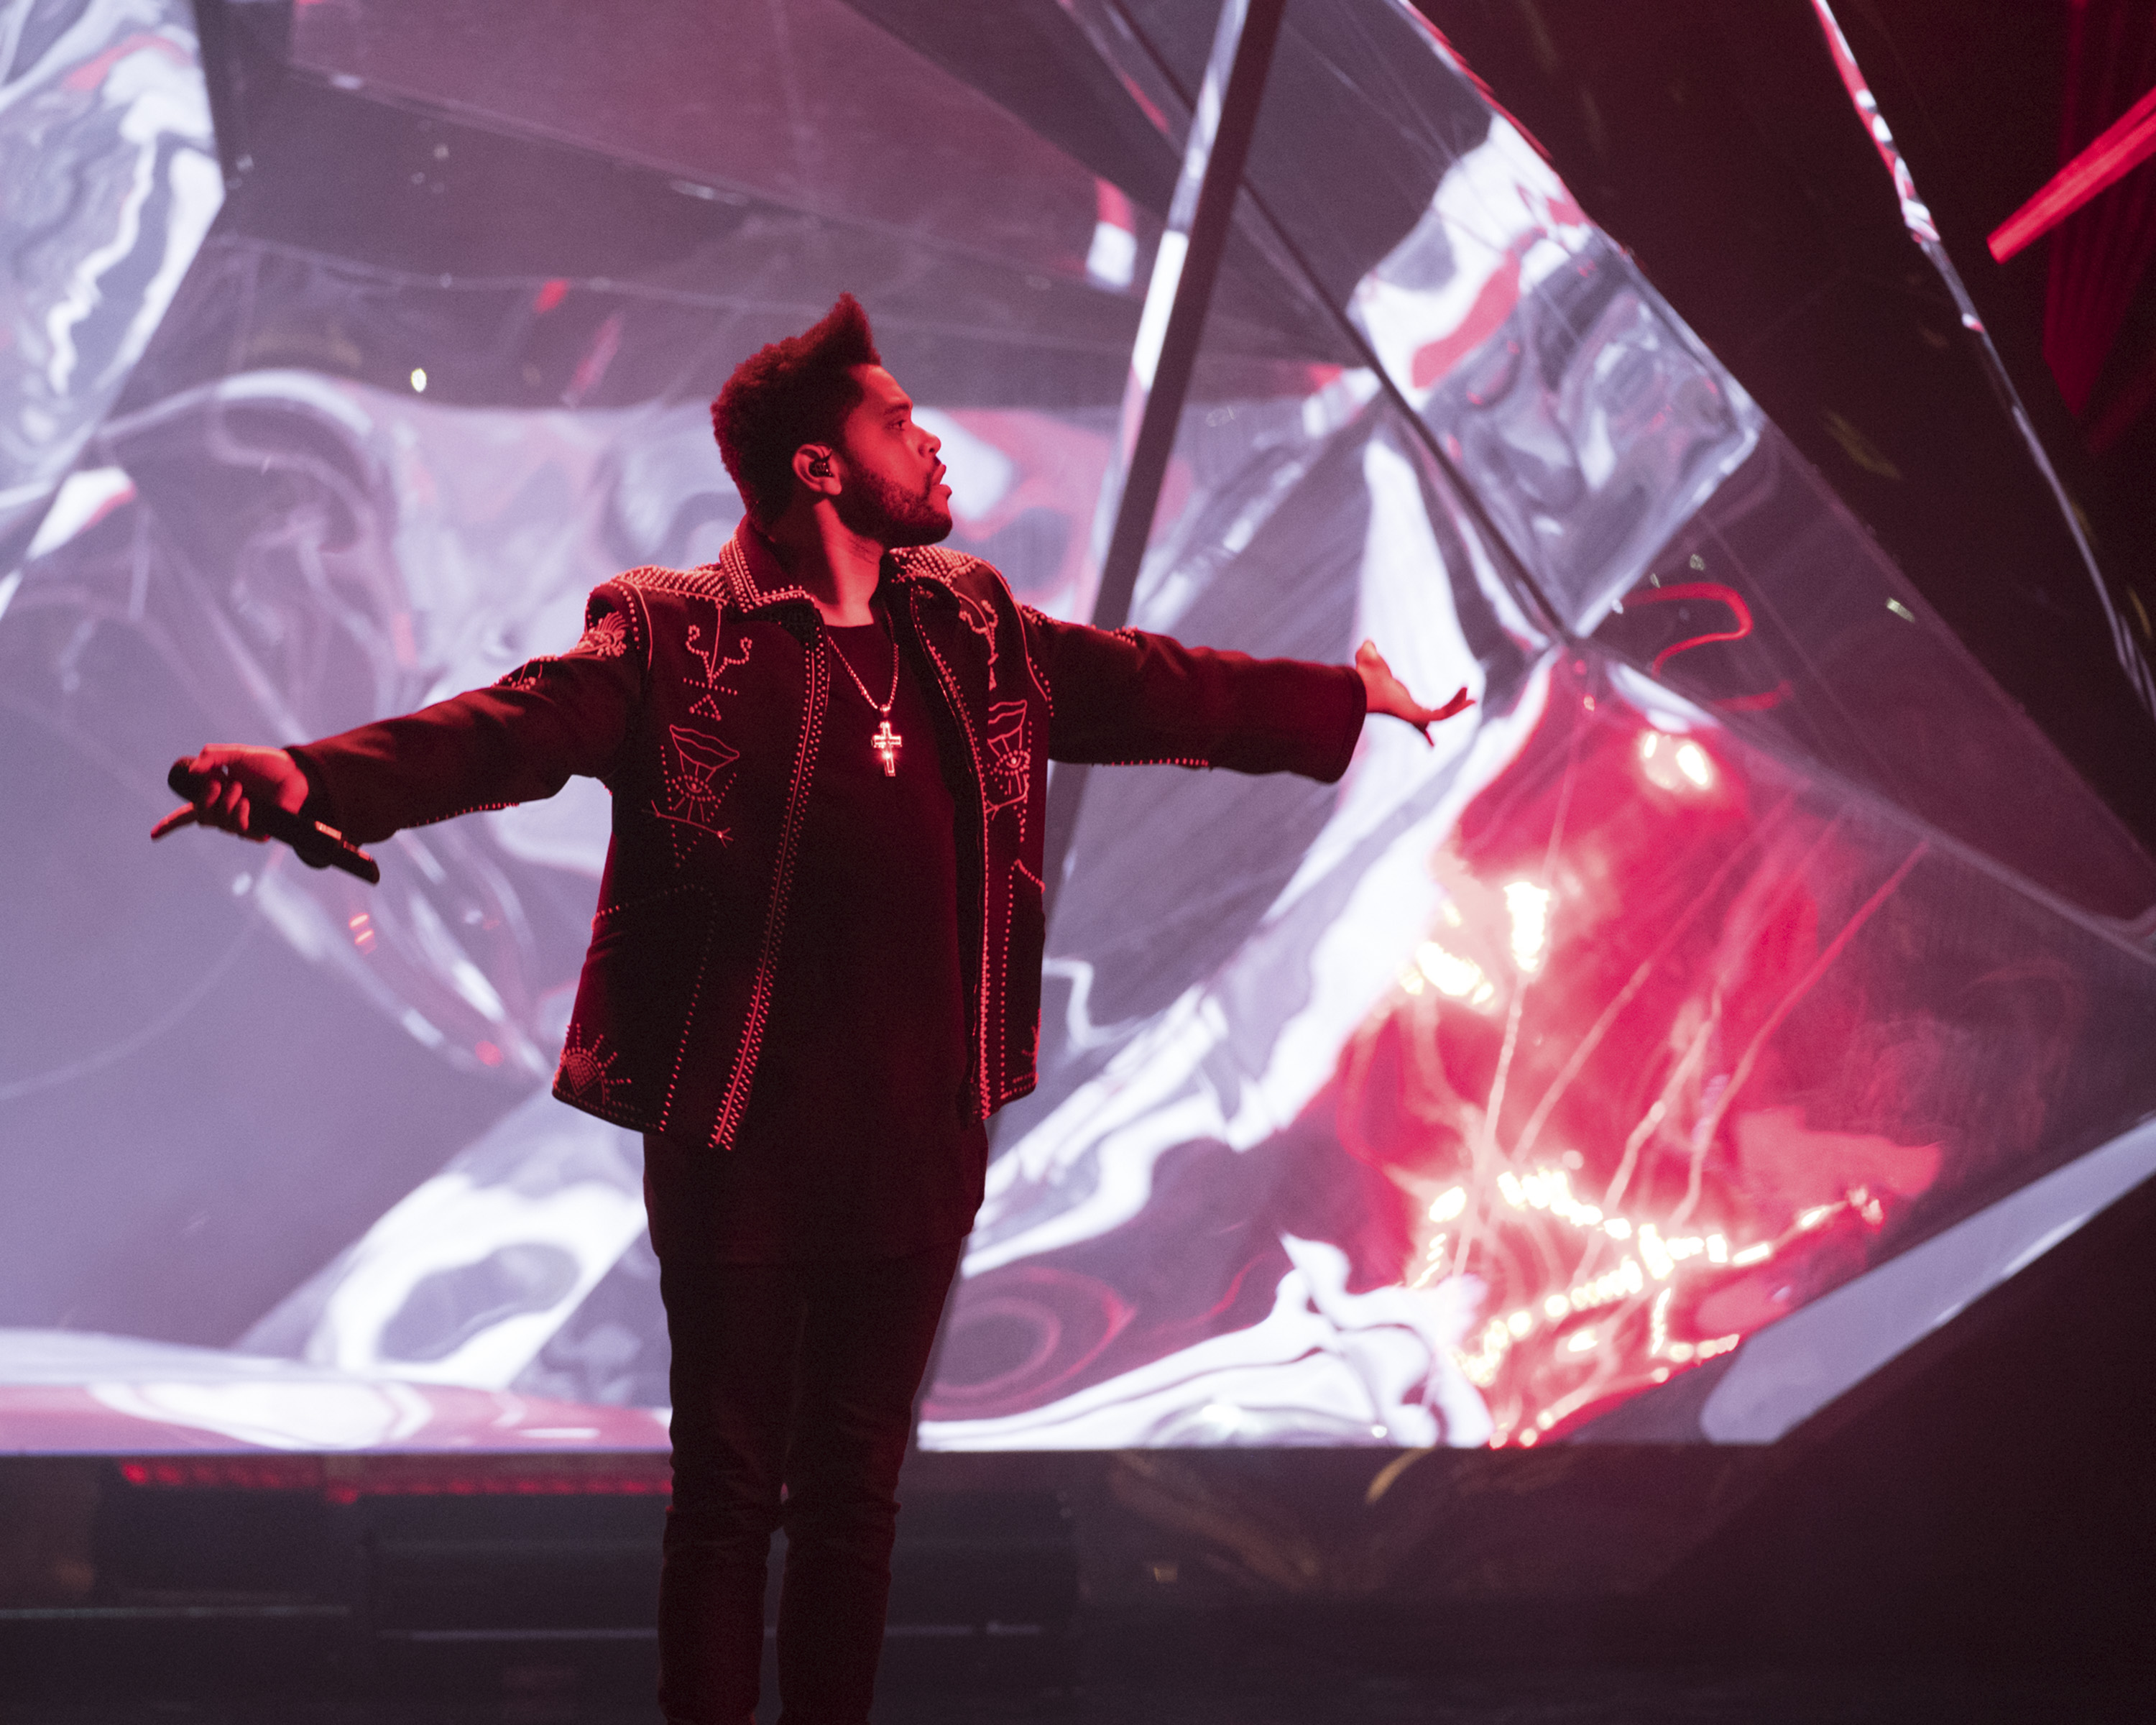 THE 2016 AMERICAN MUSIC AWARDS(r) - The “2016 American Music Awards,” the world’s biggest fan-voted award show, broadcasts live from the Microsoft Theater in Los Angeles on SUNDAY, NOVEMBER 20, at 8:00 p.m. EST, on ABC. (Image Group LA/ABC) THE WEEKND